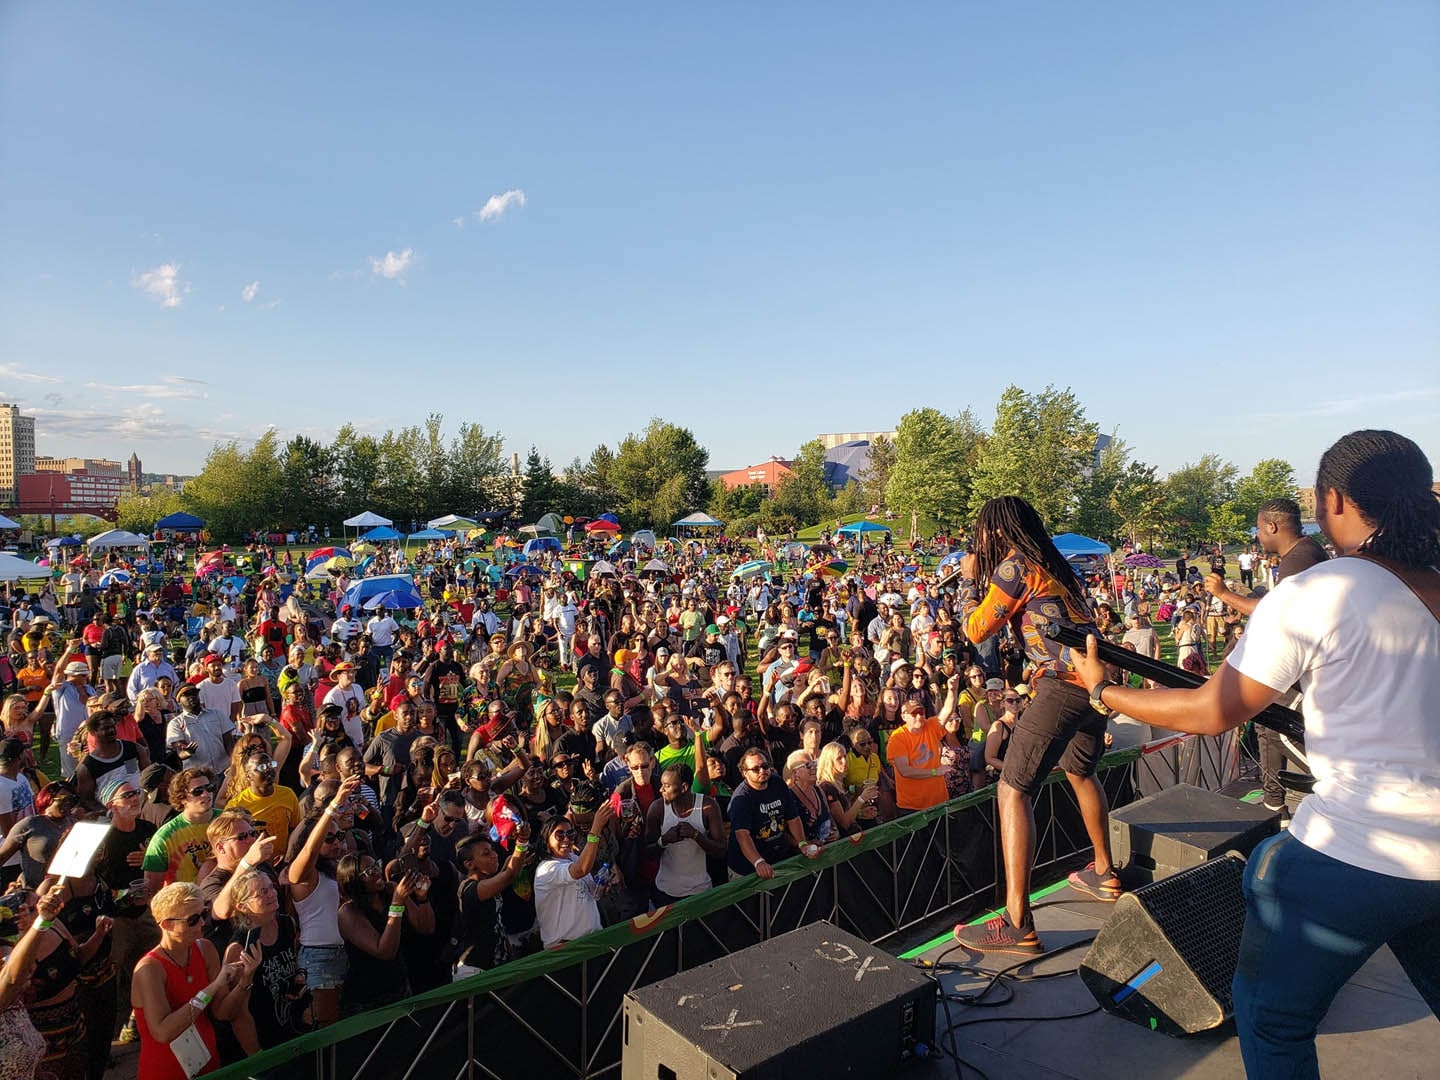 A view from the stage looking out at a crowd during the Reggae Festival in Duluth.